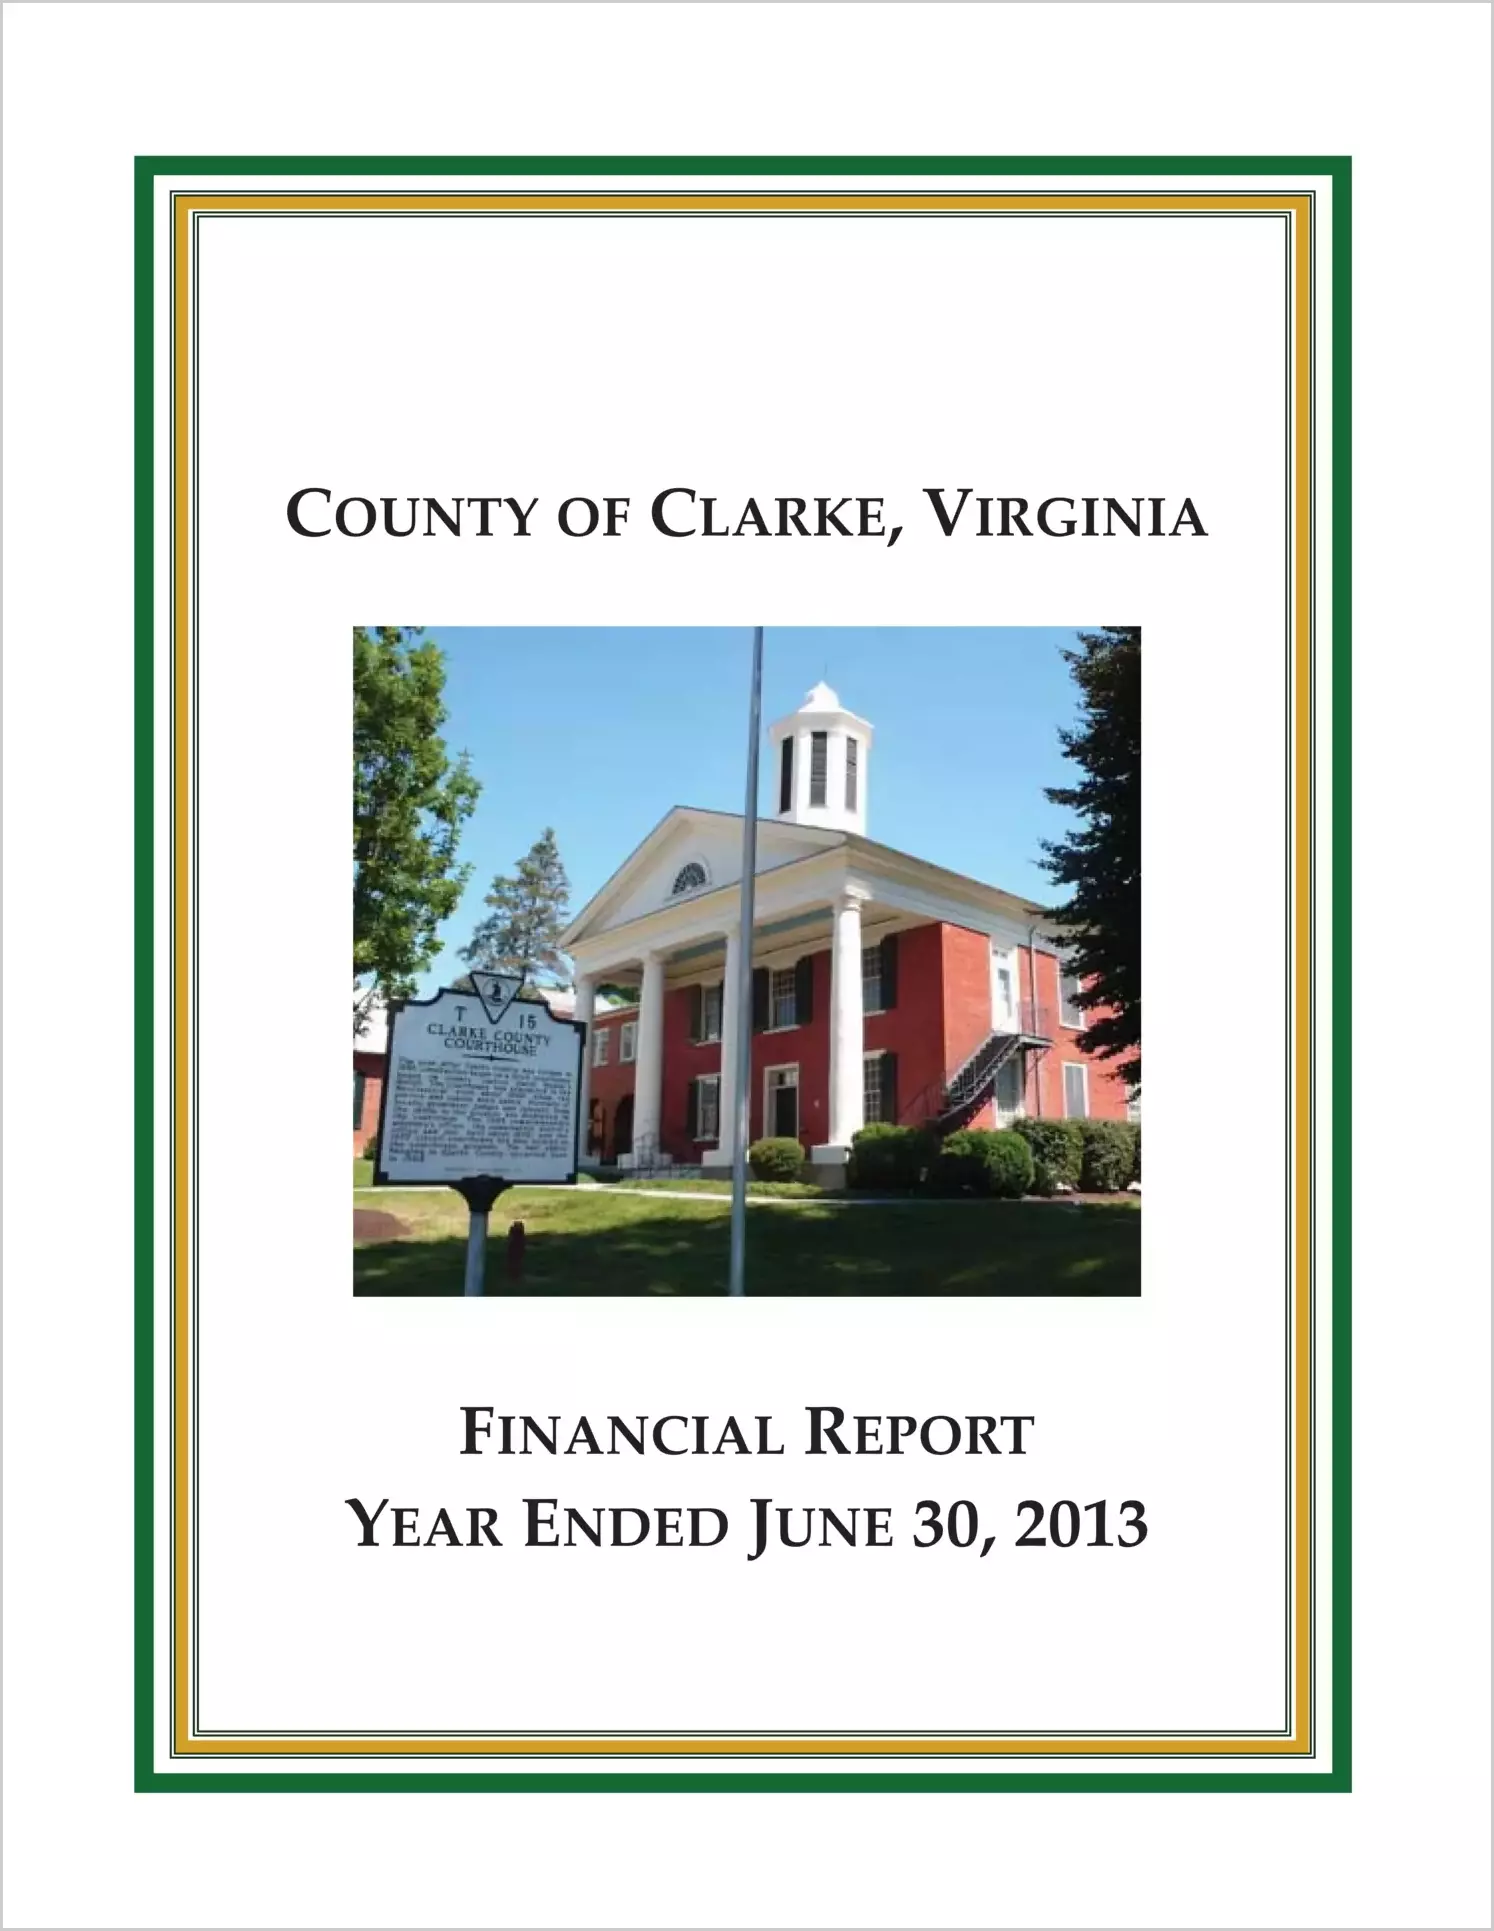 2013 Annual Financial Report for County of Clarke